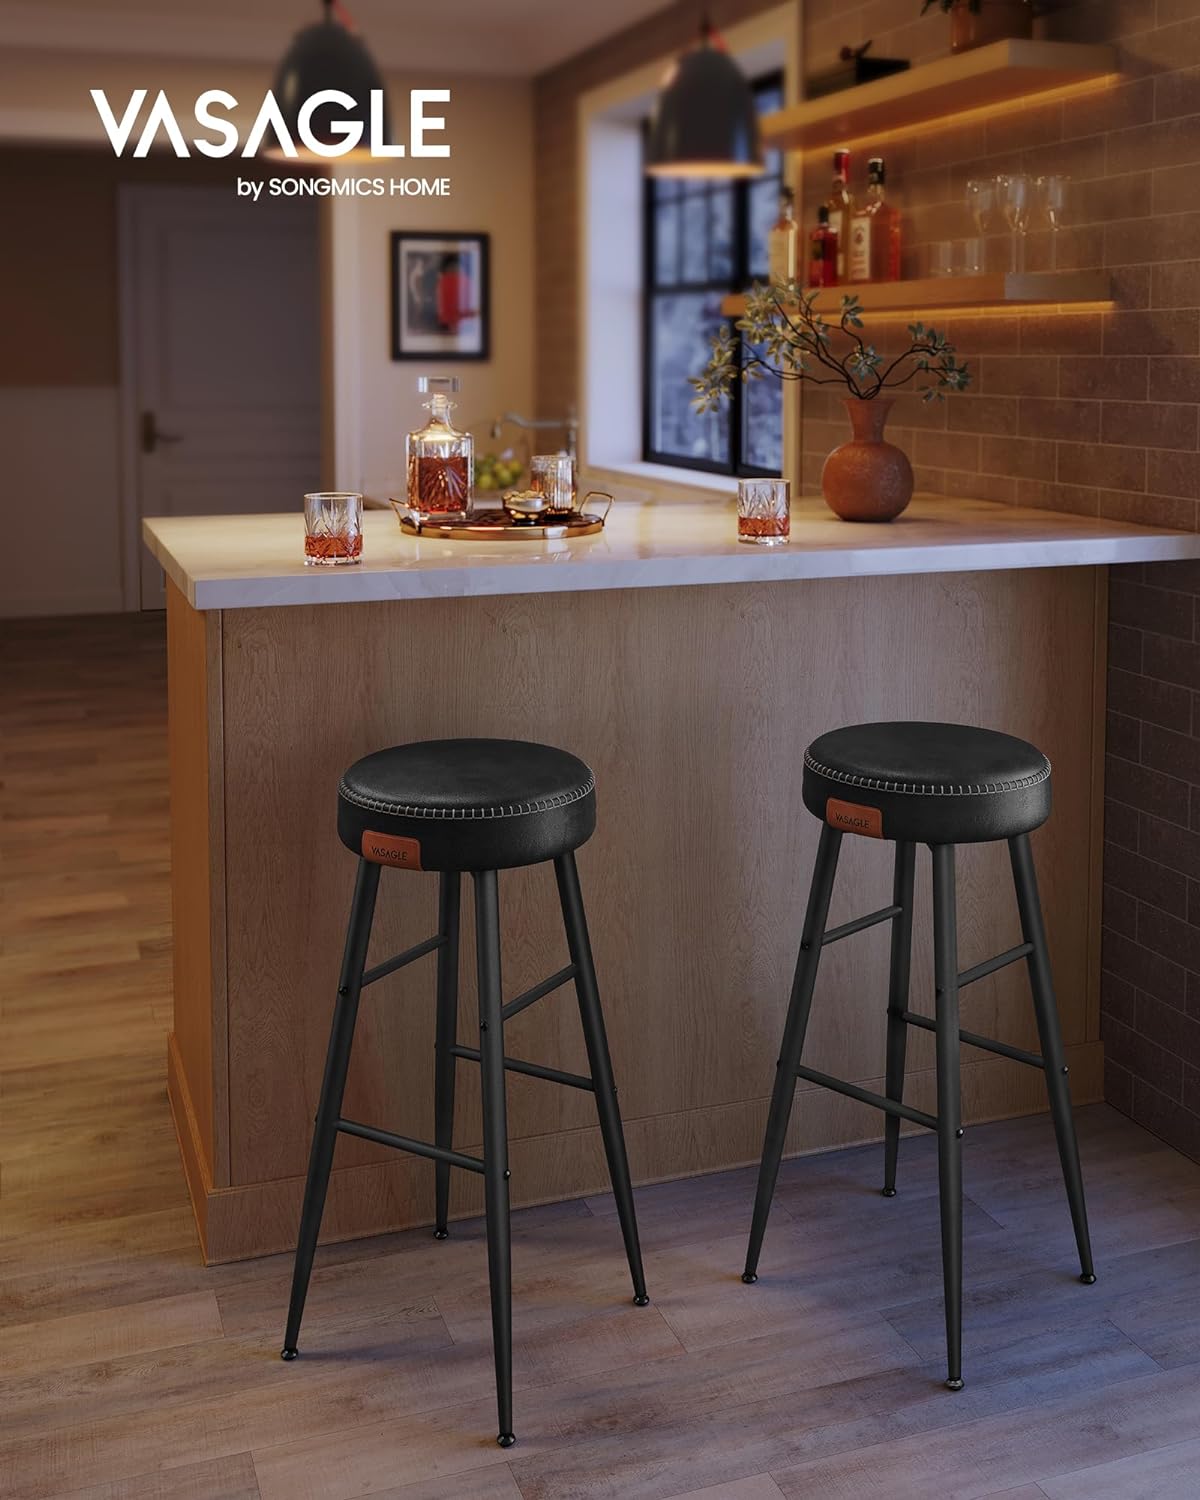 VASAGLE EKHO Collection - Bar Stools Set of 2, Kitchen Counter Stools, Breakfast Stools, Synthetic Leather with Stitching,